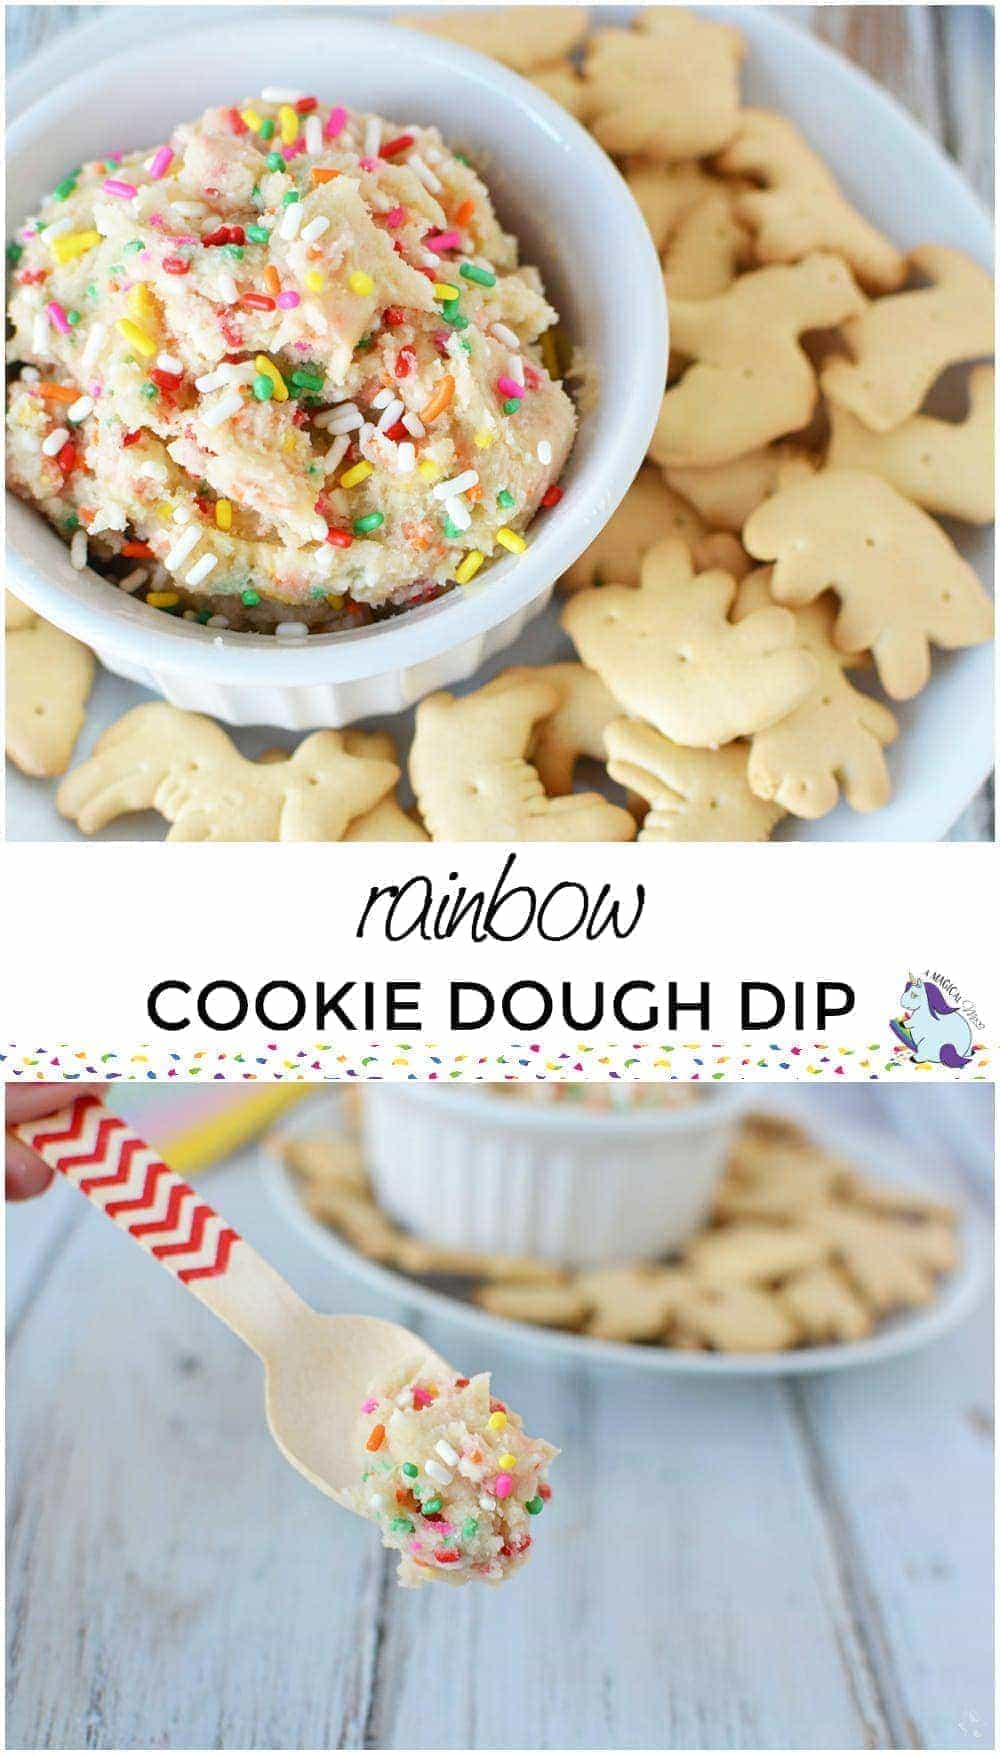 Bowl of cookie dough with sprinkles surrounded by animal crackers. 